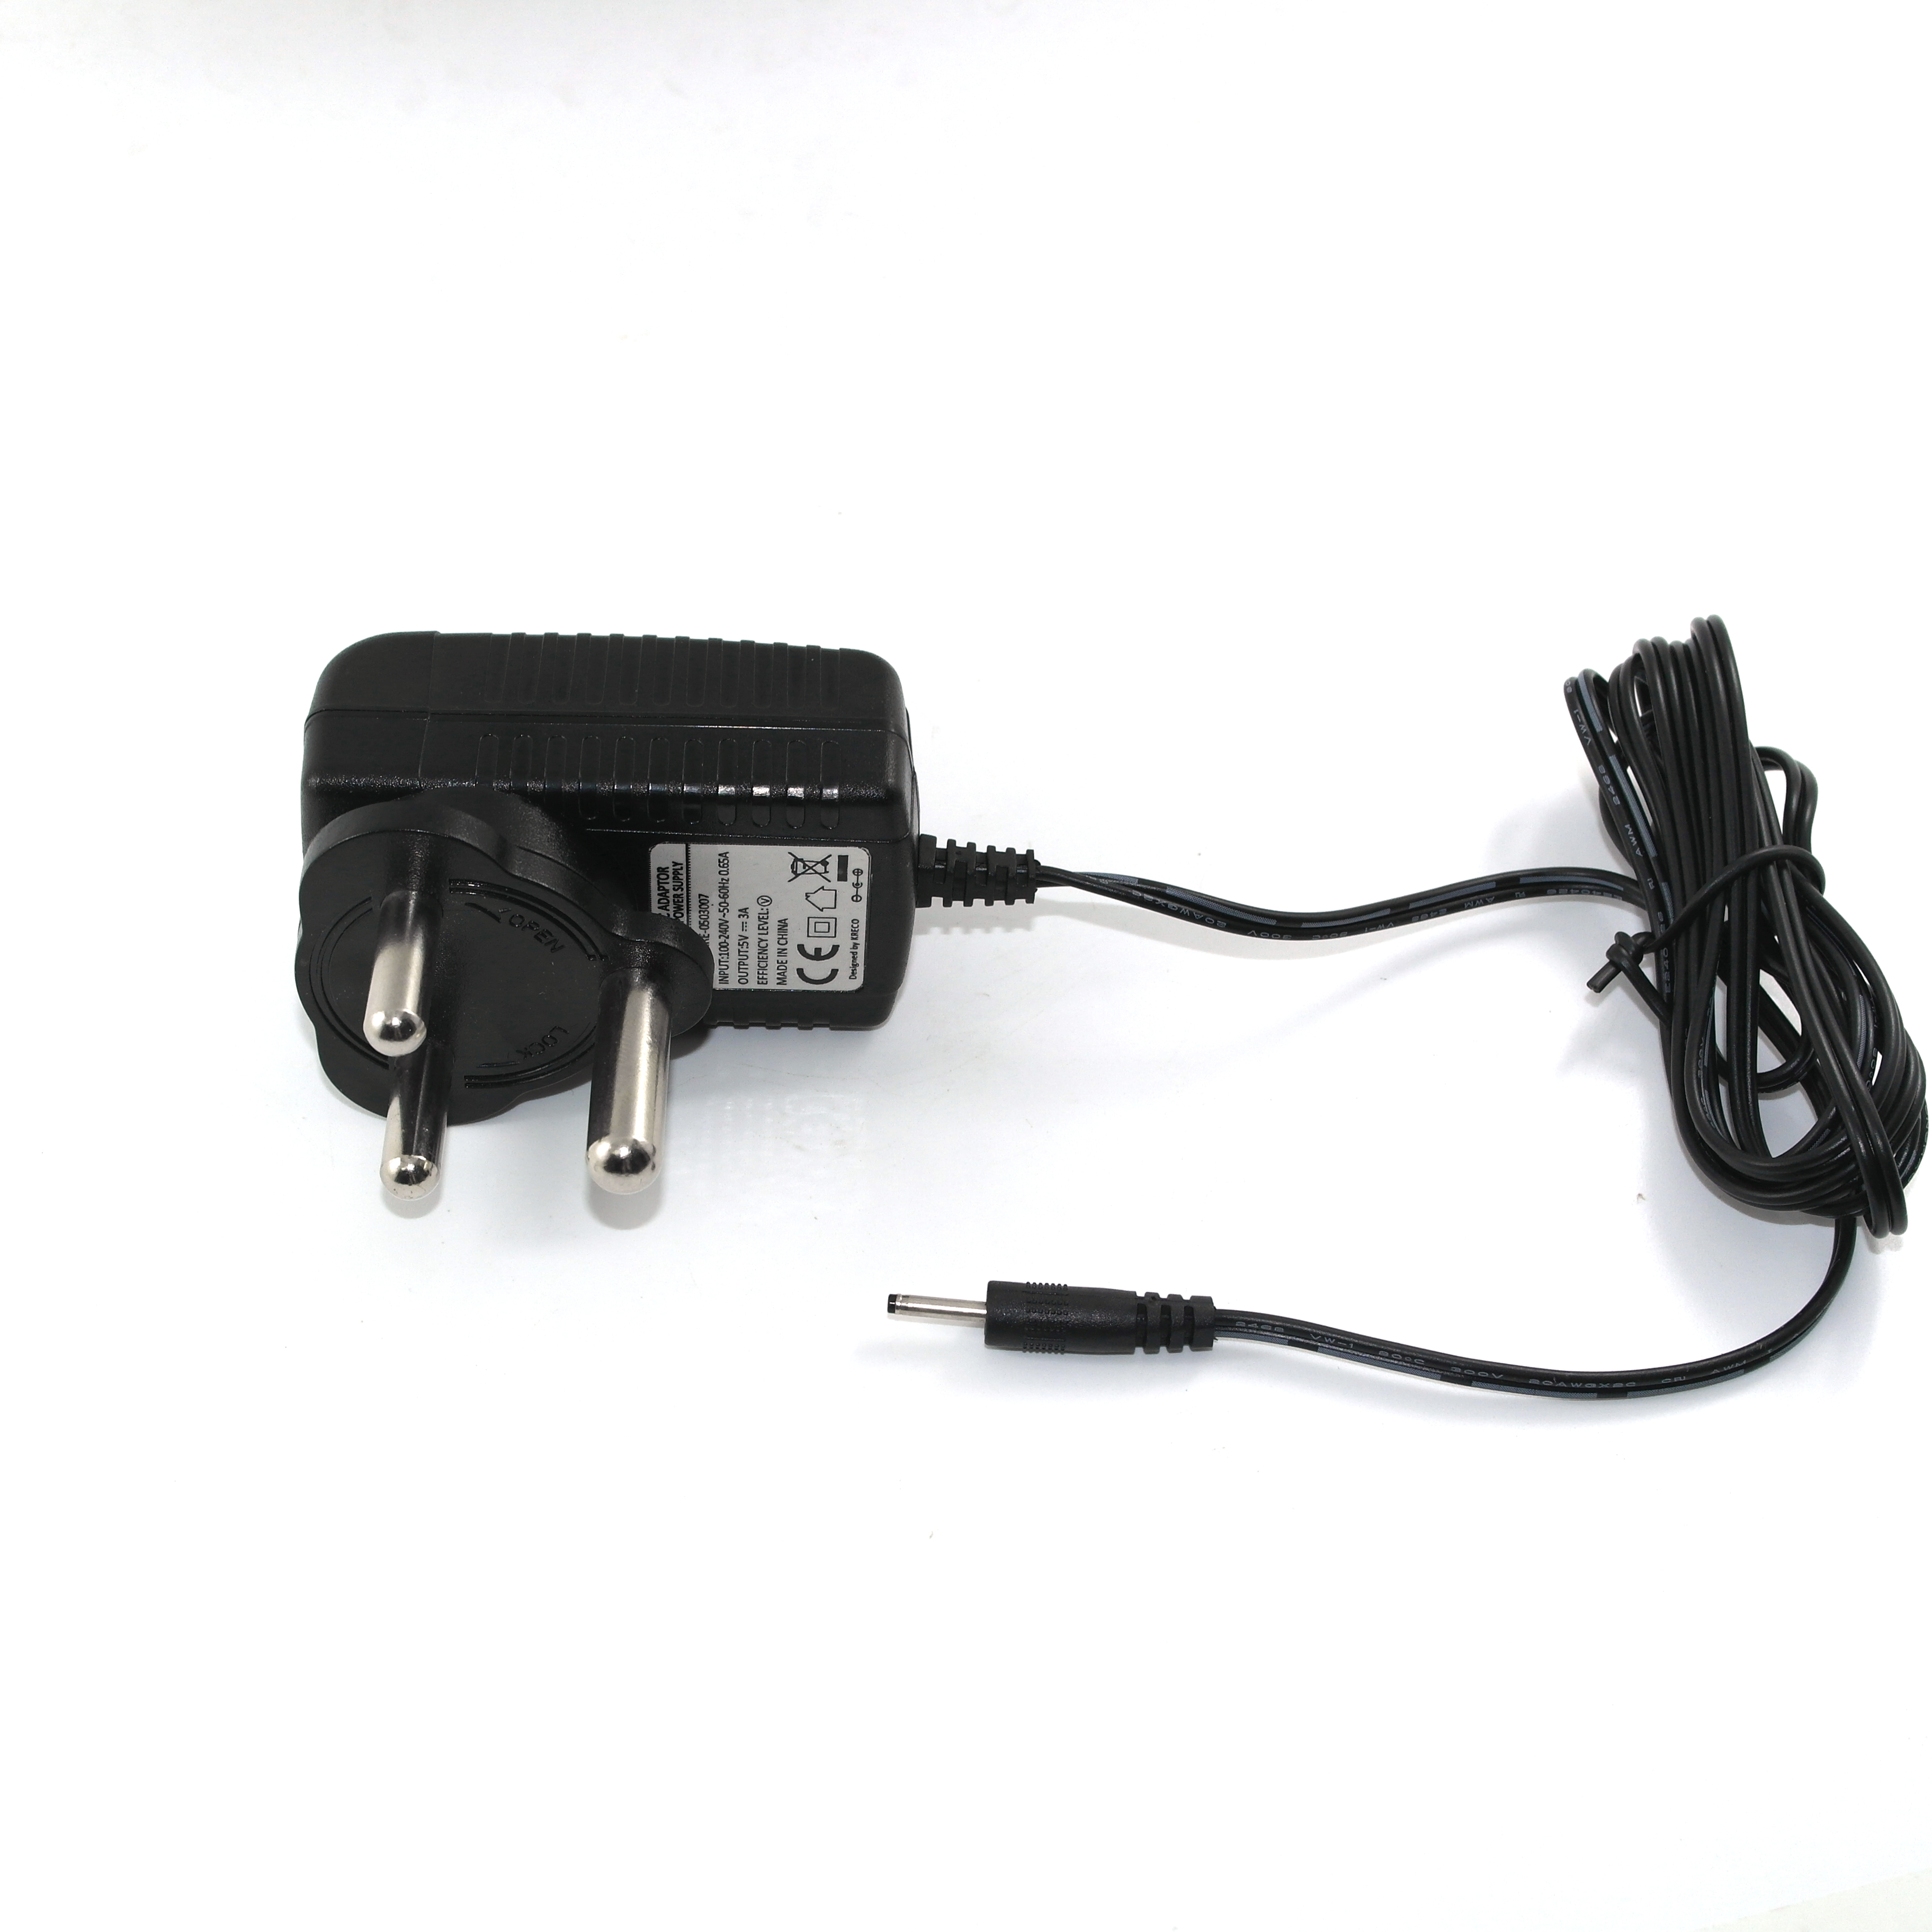 KRE-050300Z,5V 3A 15W AC/DC adapter, switching power supply,Can change South African pin